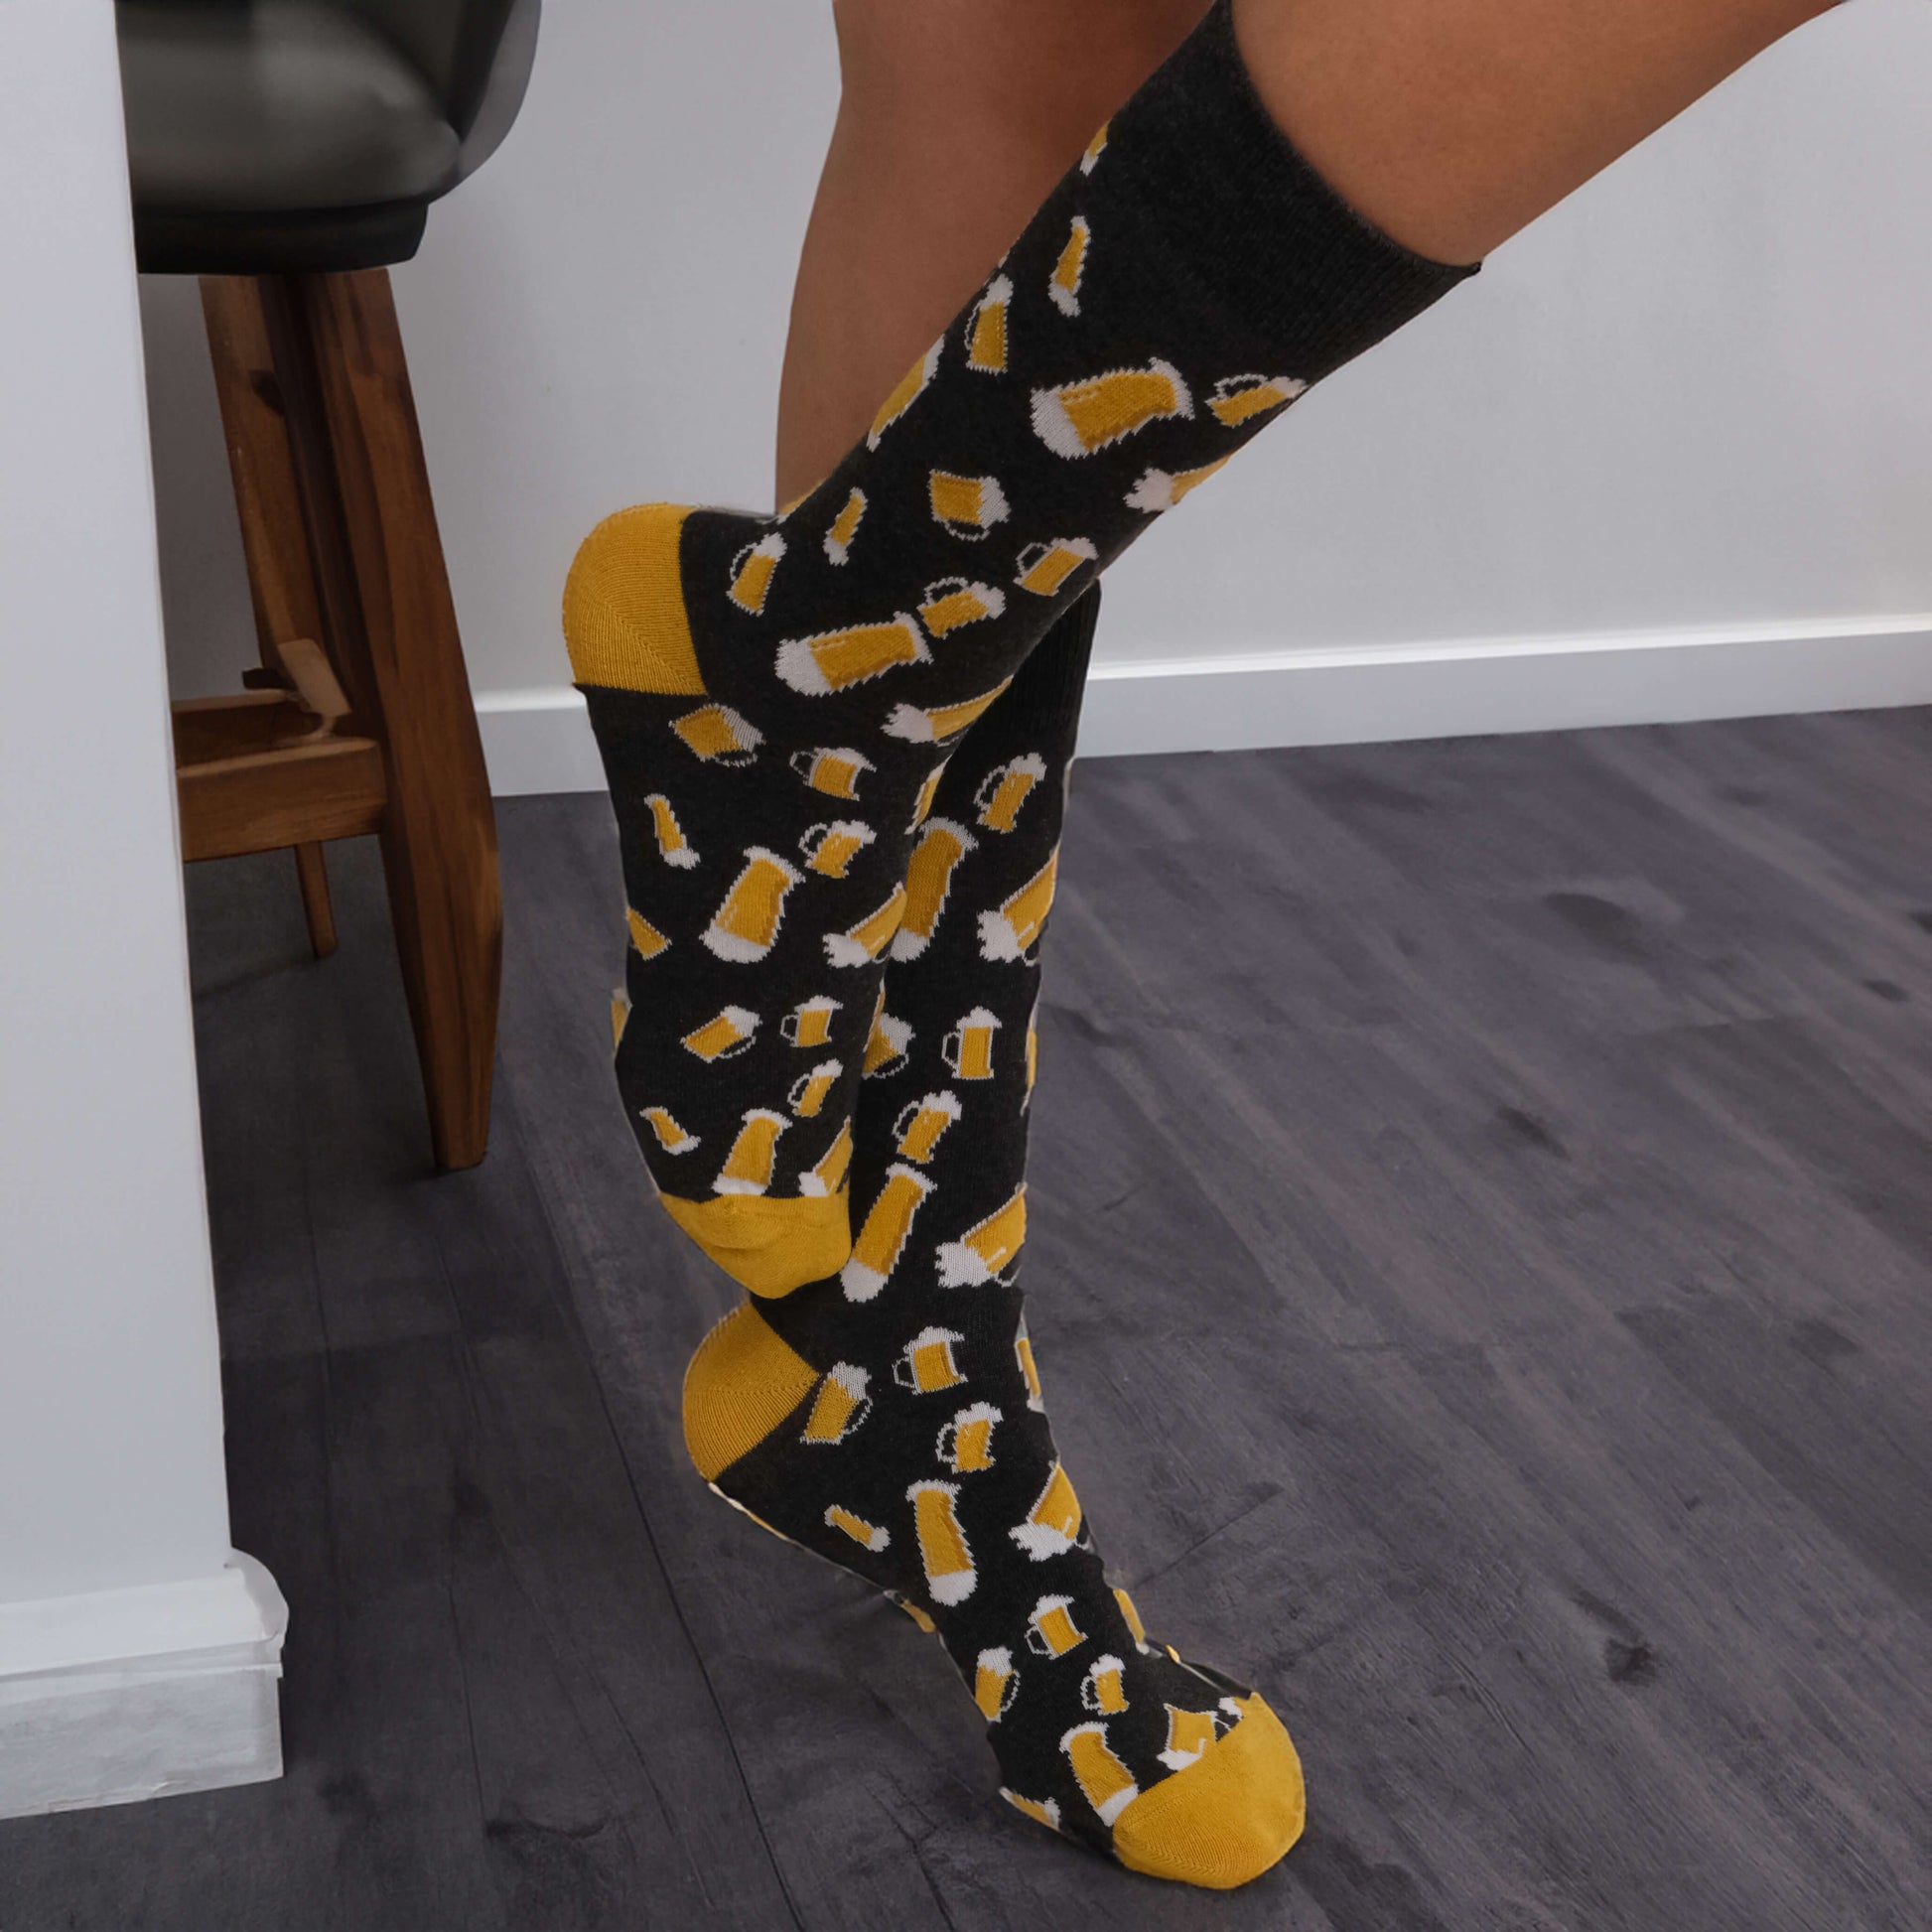 Step into a world of fun with these socks featuring a playful mix of banana, hotdog, beer, cheese, hot sauce, and avocado patterns. Your sock drawer just got a lot more interesting!&quot;